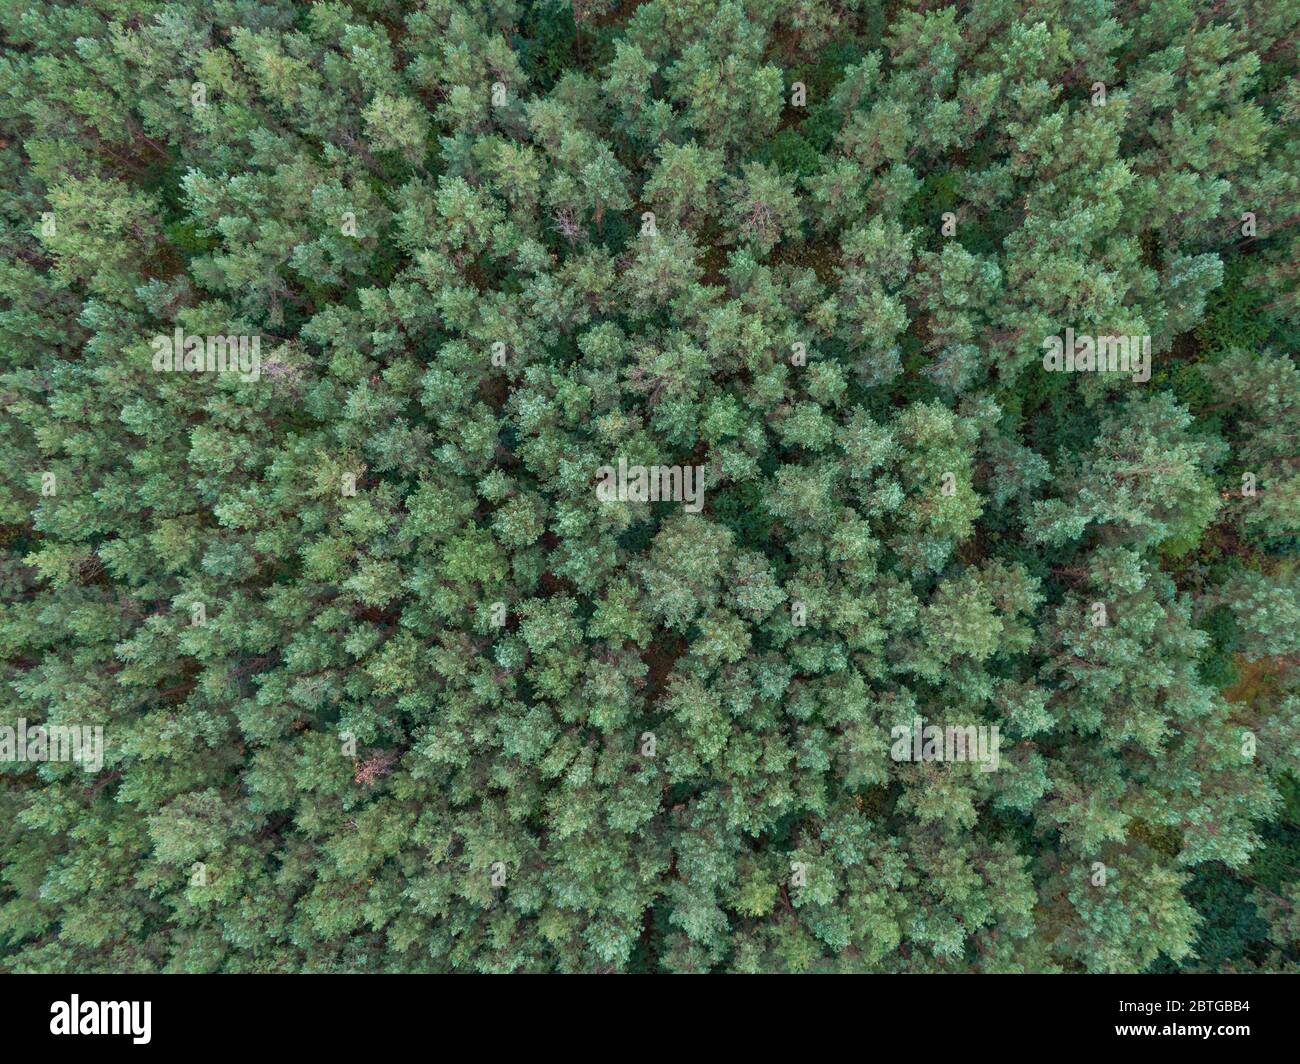 Green pine forest top down image Stock Photo